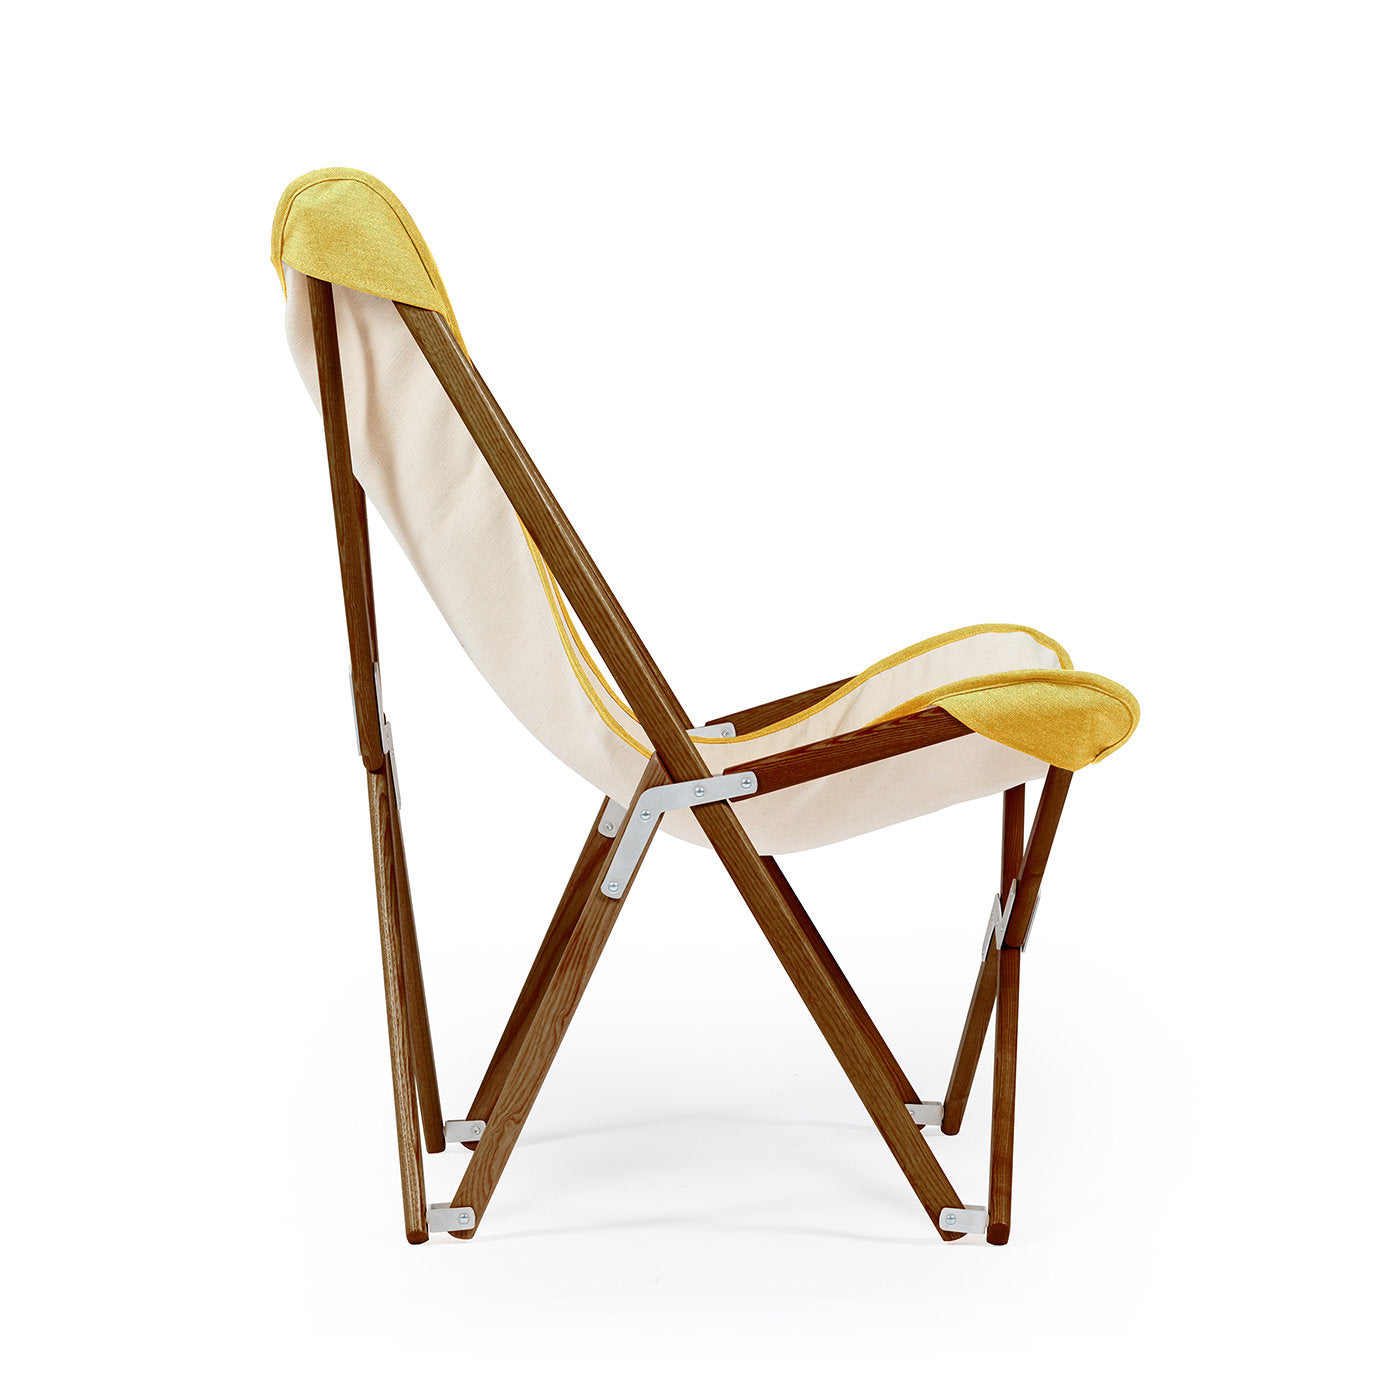 Tripolina Armchair in Cream and Mustard Yellow - Alternative view 1